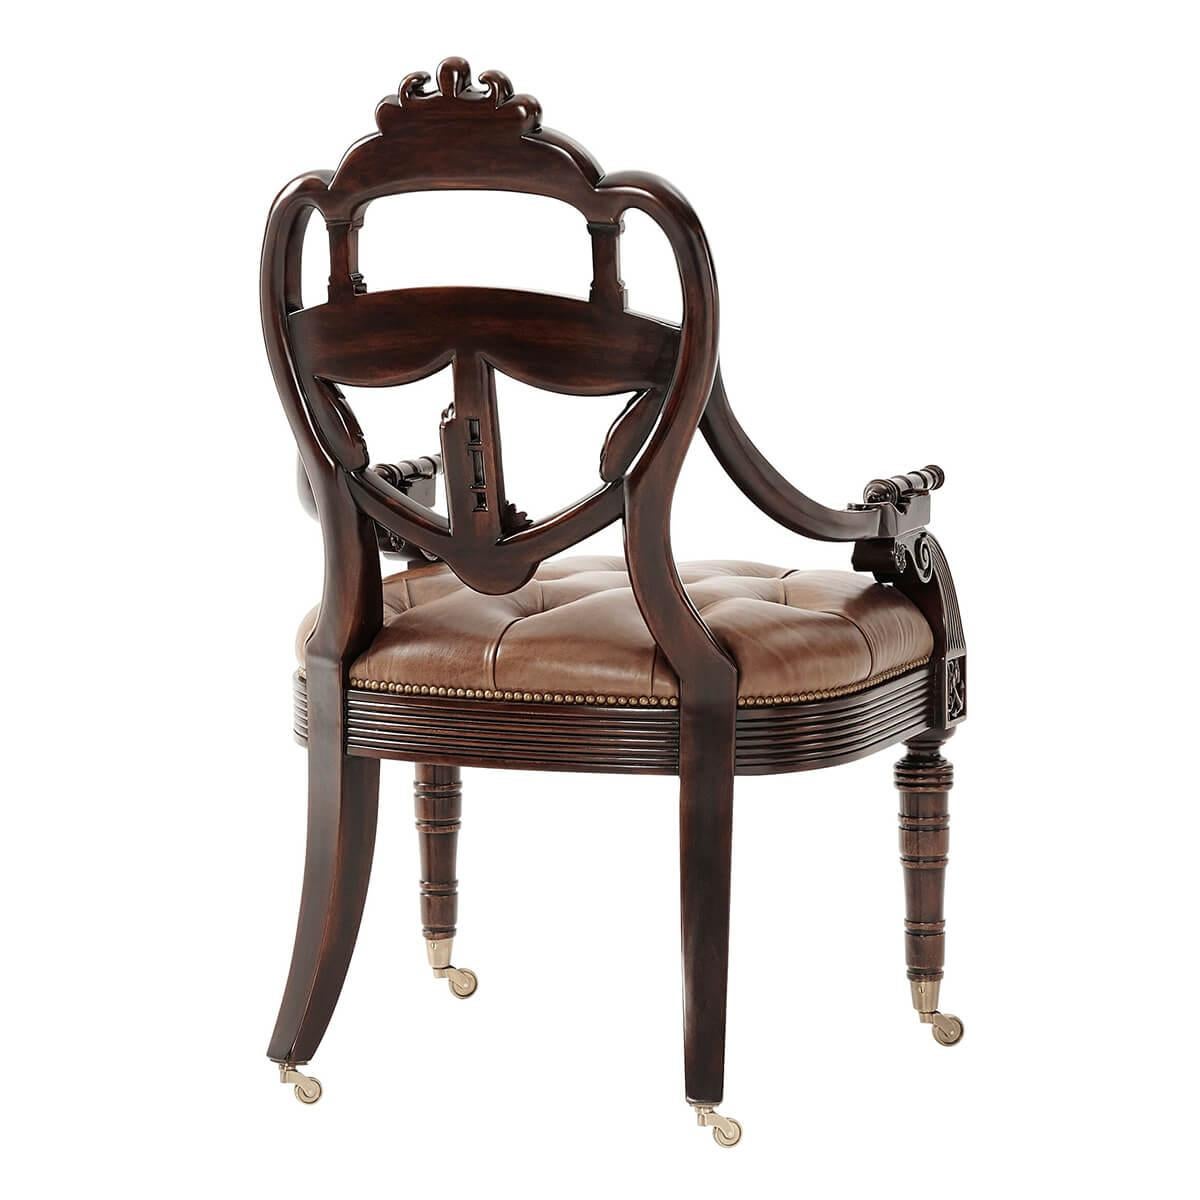 An exceptionally well hand carved mahogany library armchair, the back in the shape of a ship's transom carved with a coat of arms centered by the spencer crest and flanked by Victory wreaths. Inspired by a Regency original.

Dimensions: 44.25” H x